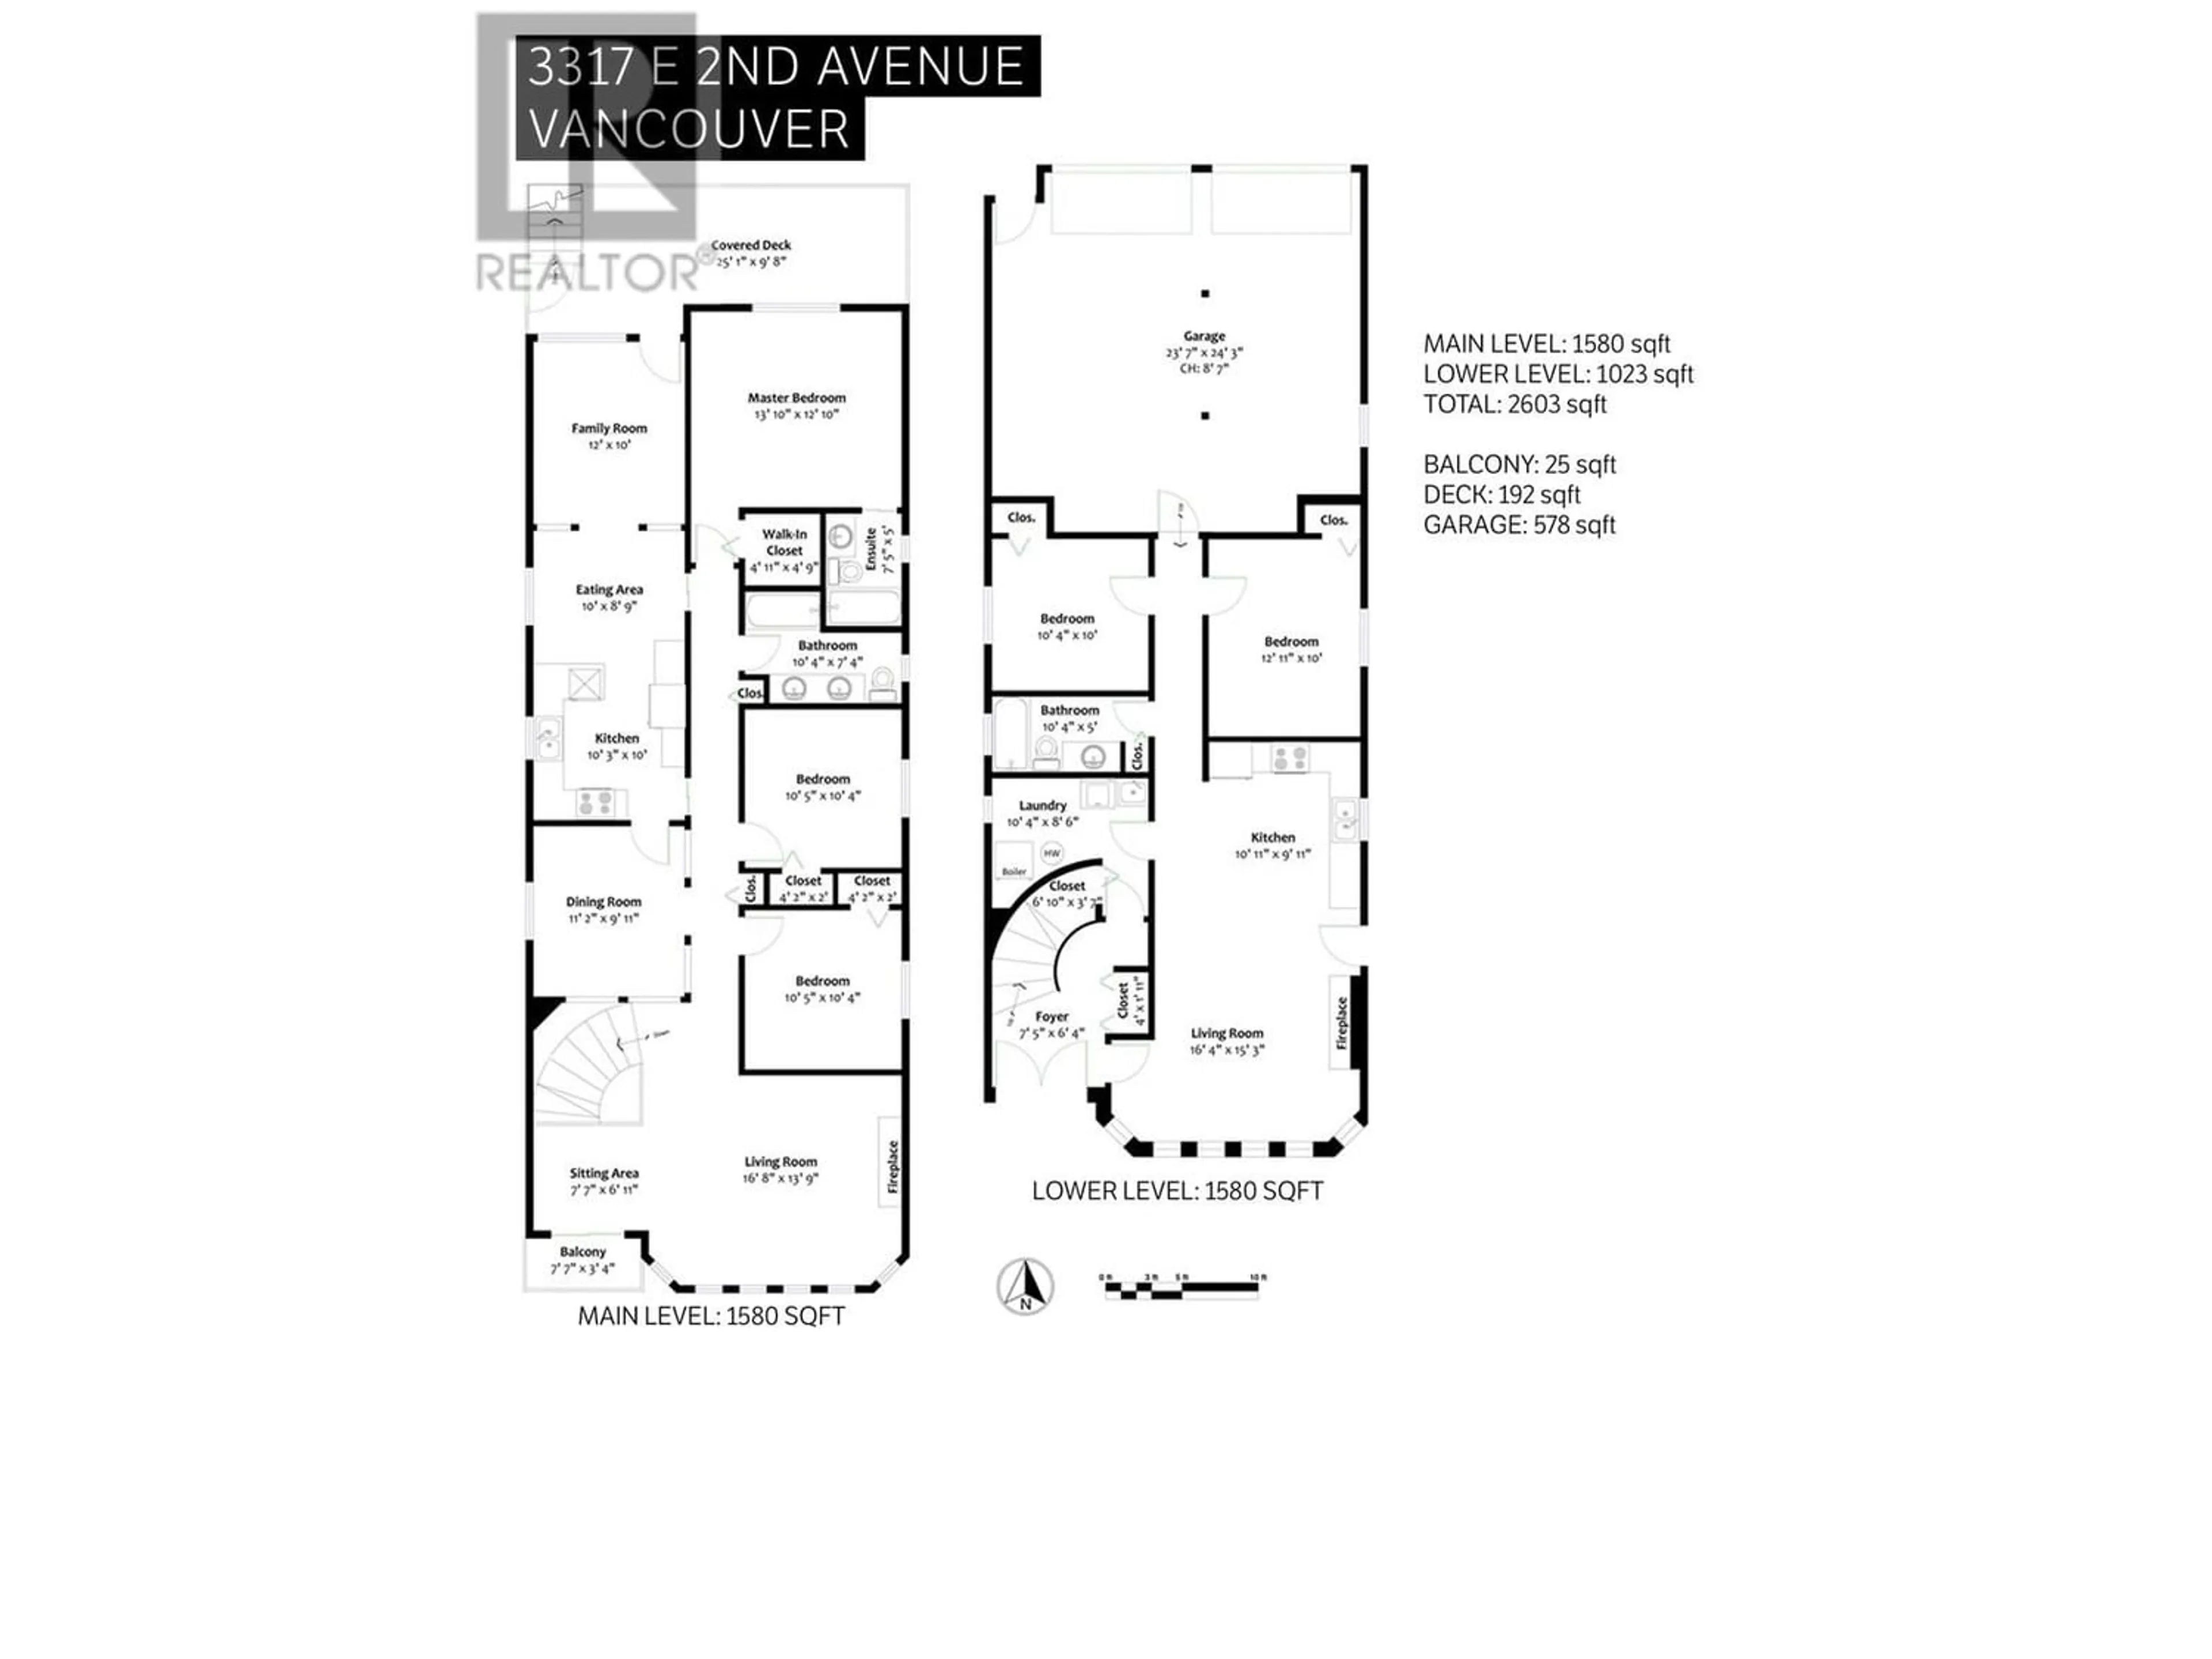 Floor plan for 3317 E 2ND AVENUE, Vancouver British Columbia V5M1G4